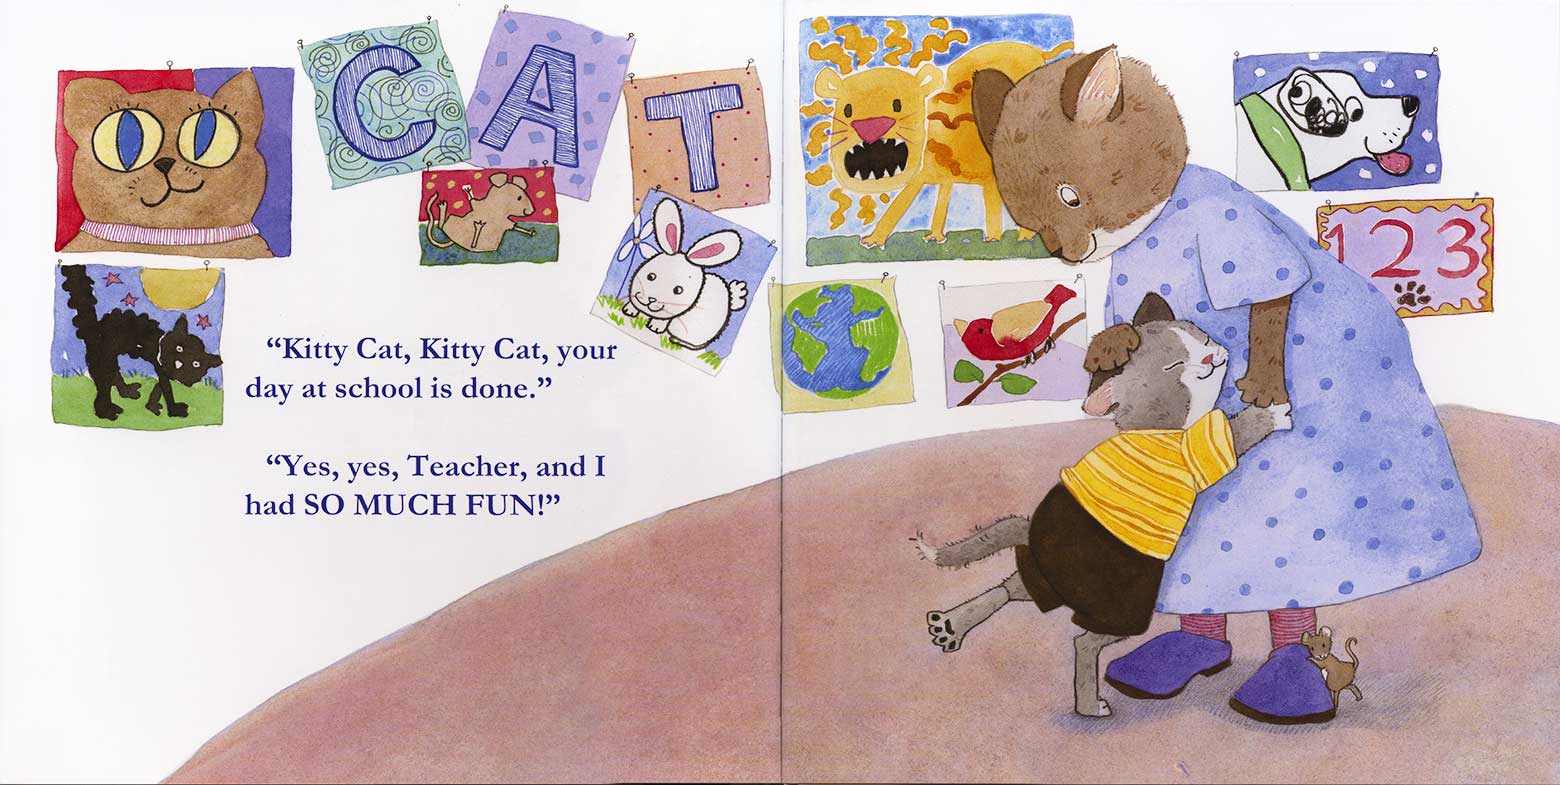 Kitty Cat, Kitty Cat, Are You Going to School? by Laura J. Bryant